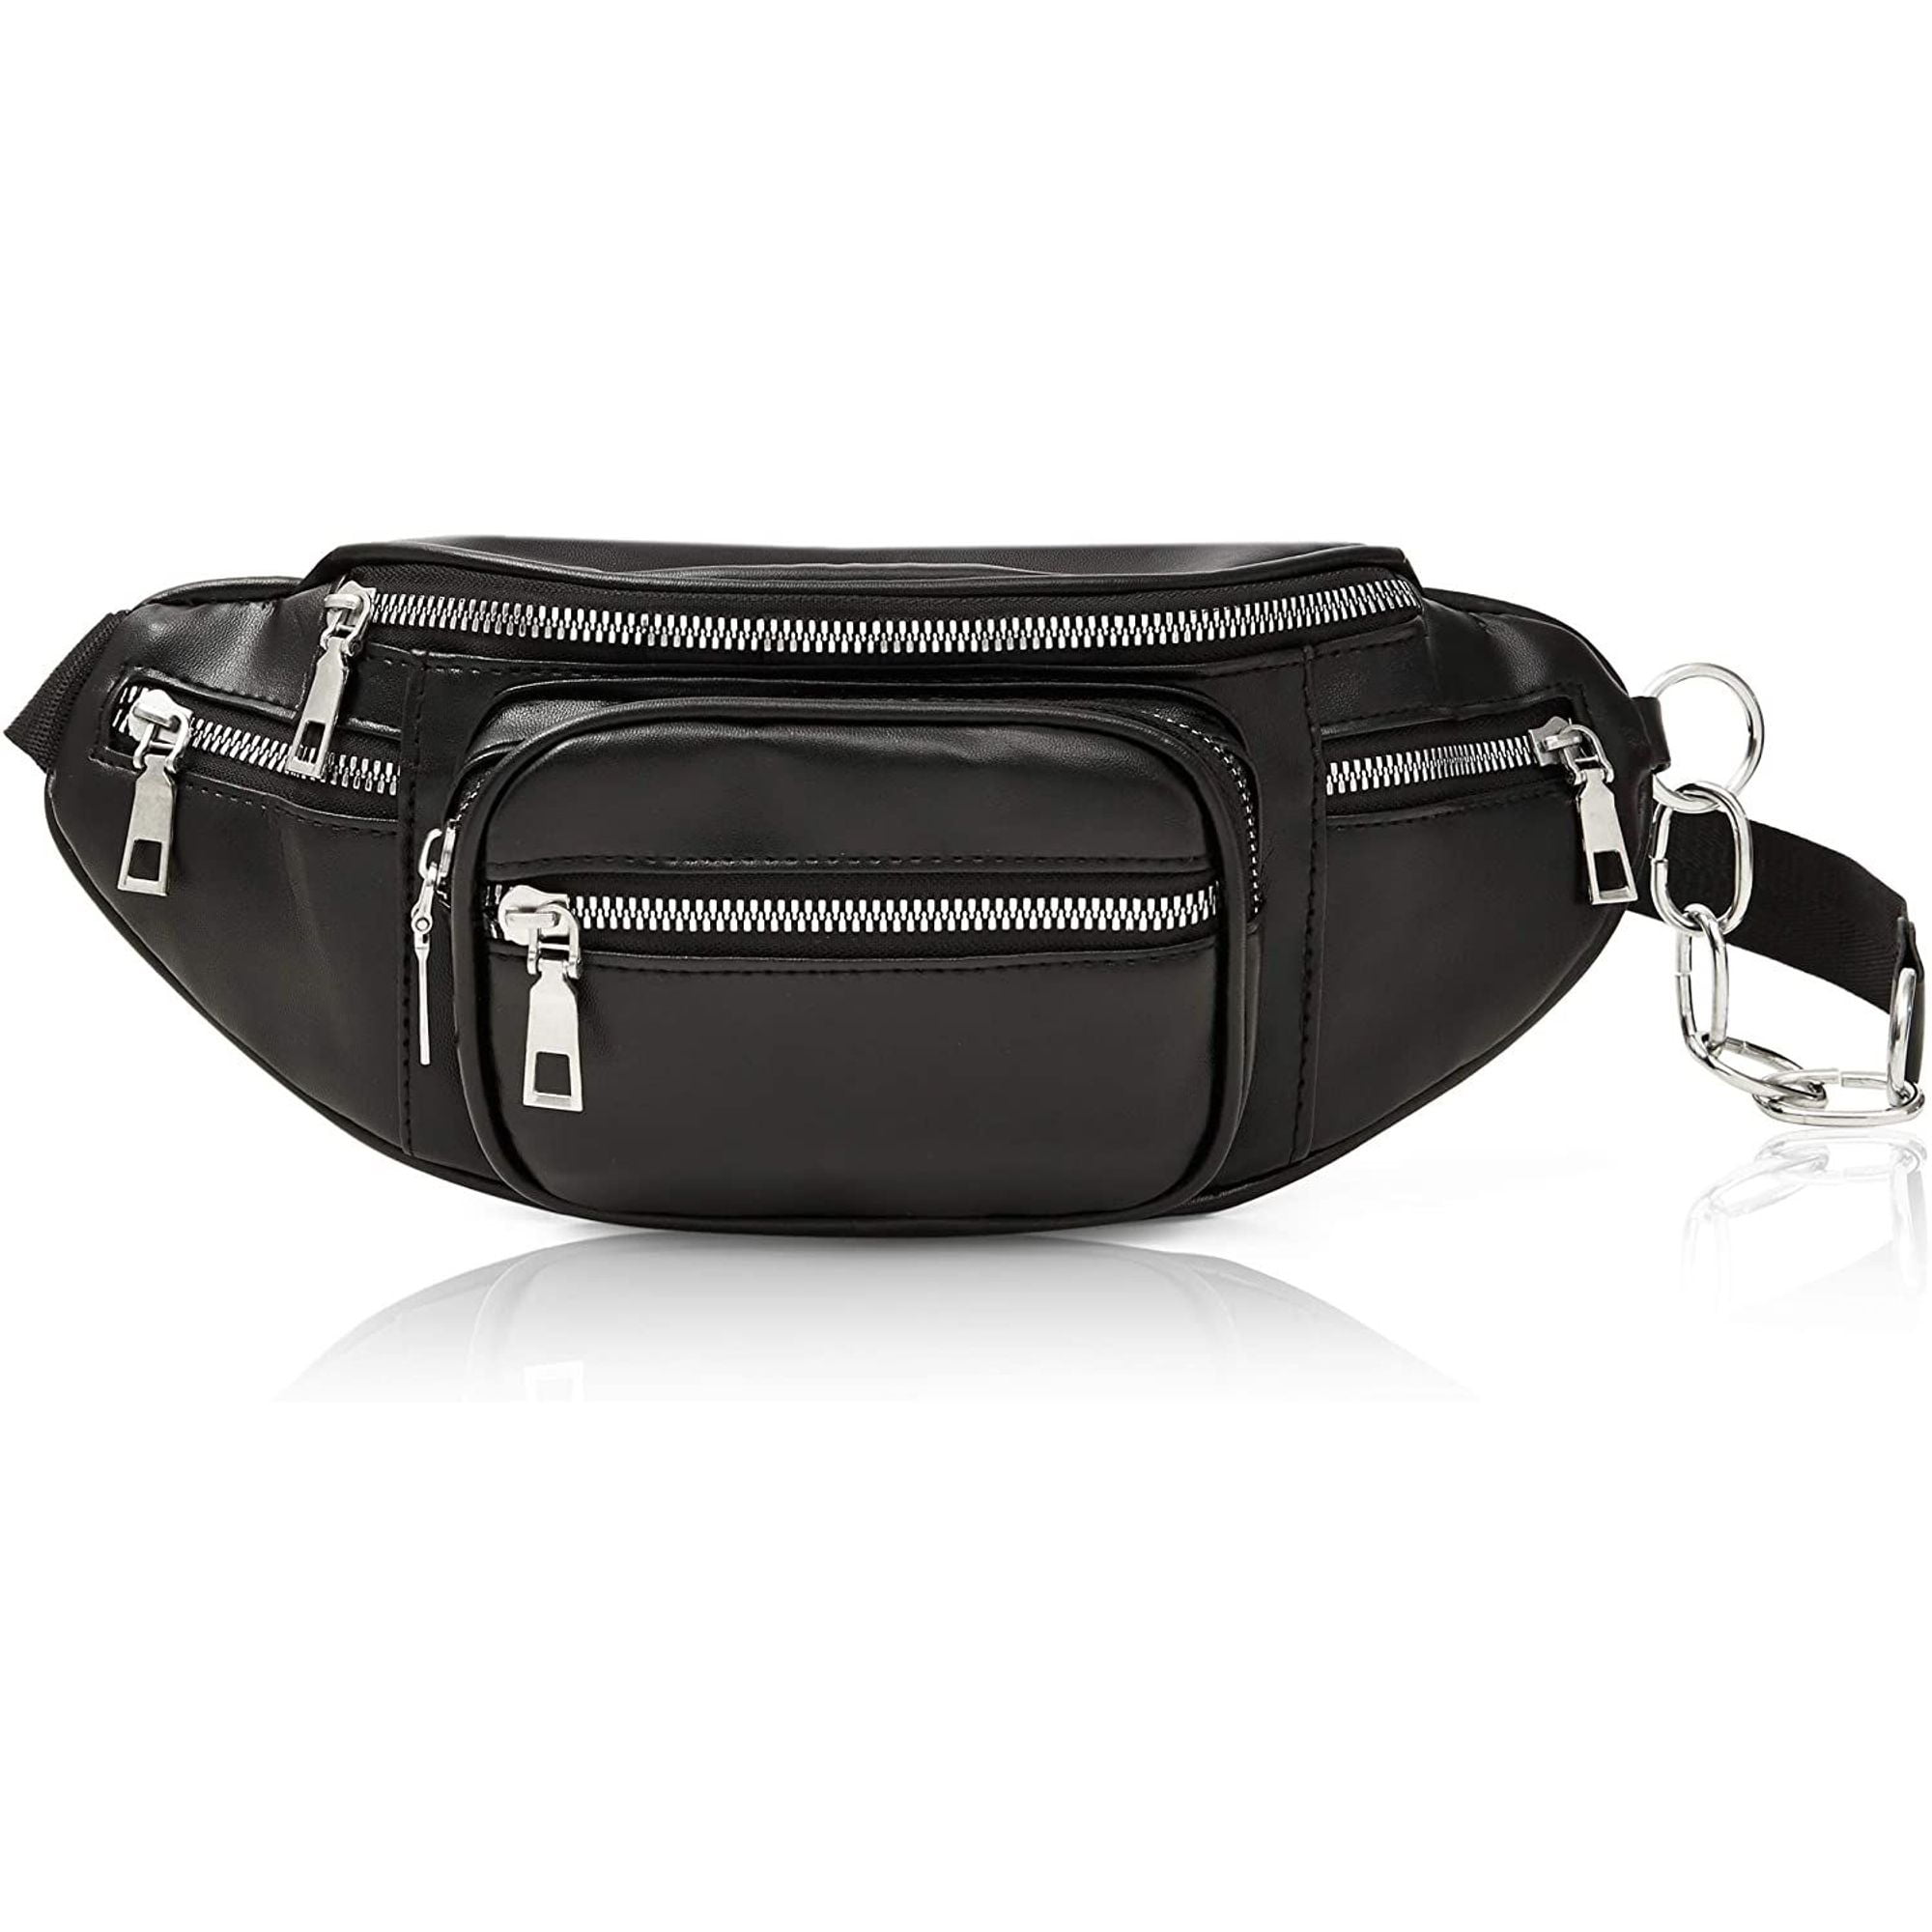 Zodaca - Black Faux Leather Fanny Pack for Women, Traveling Belt Bag Pouch with Adjustable Waist ...